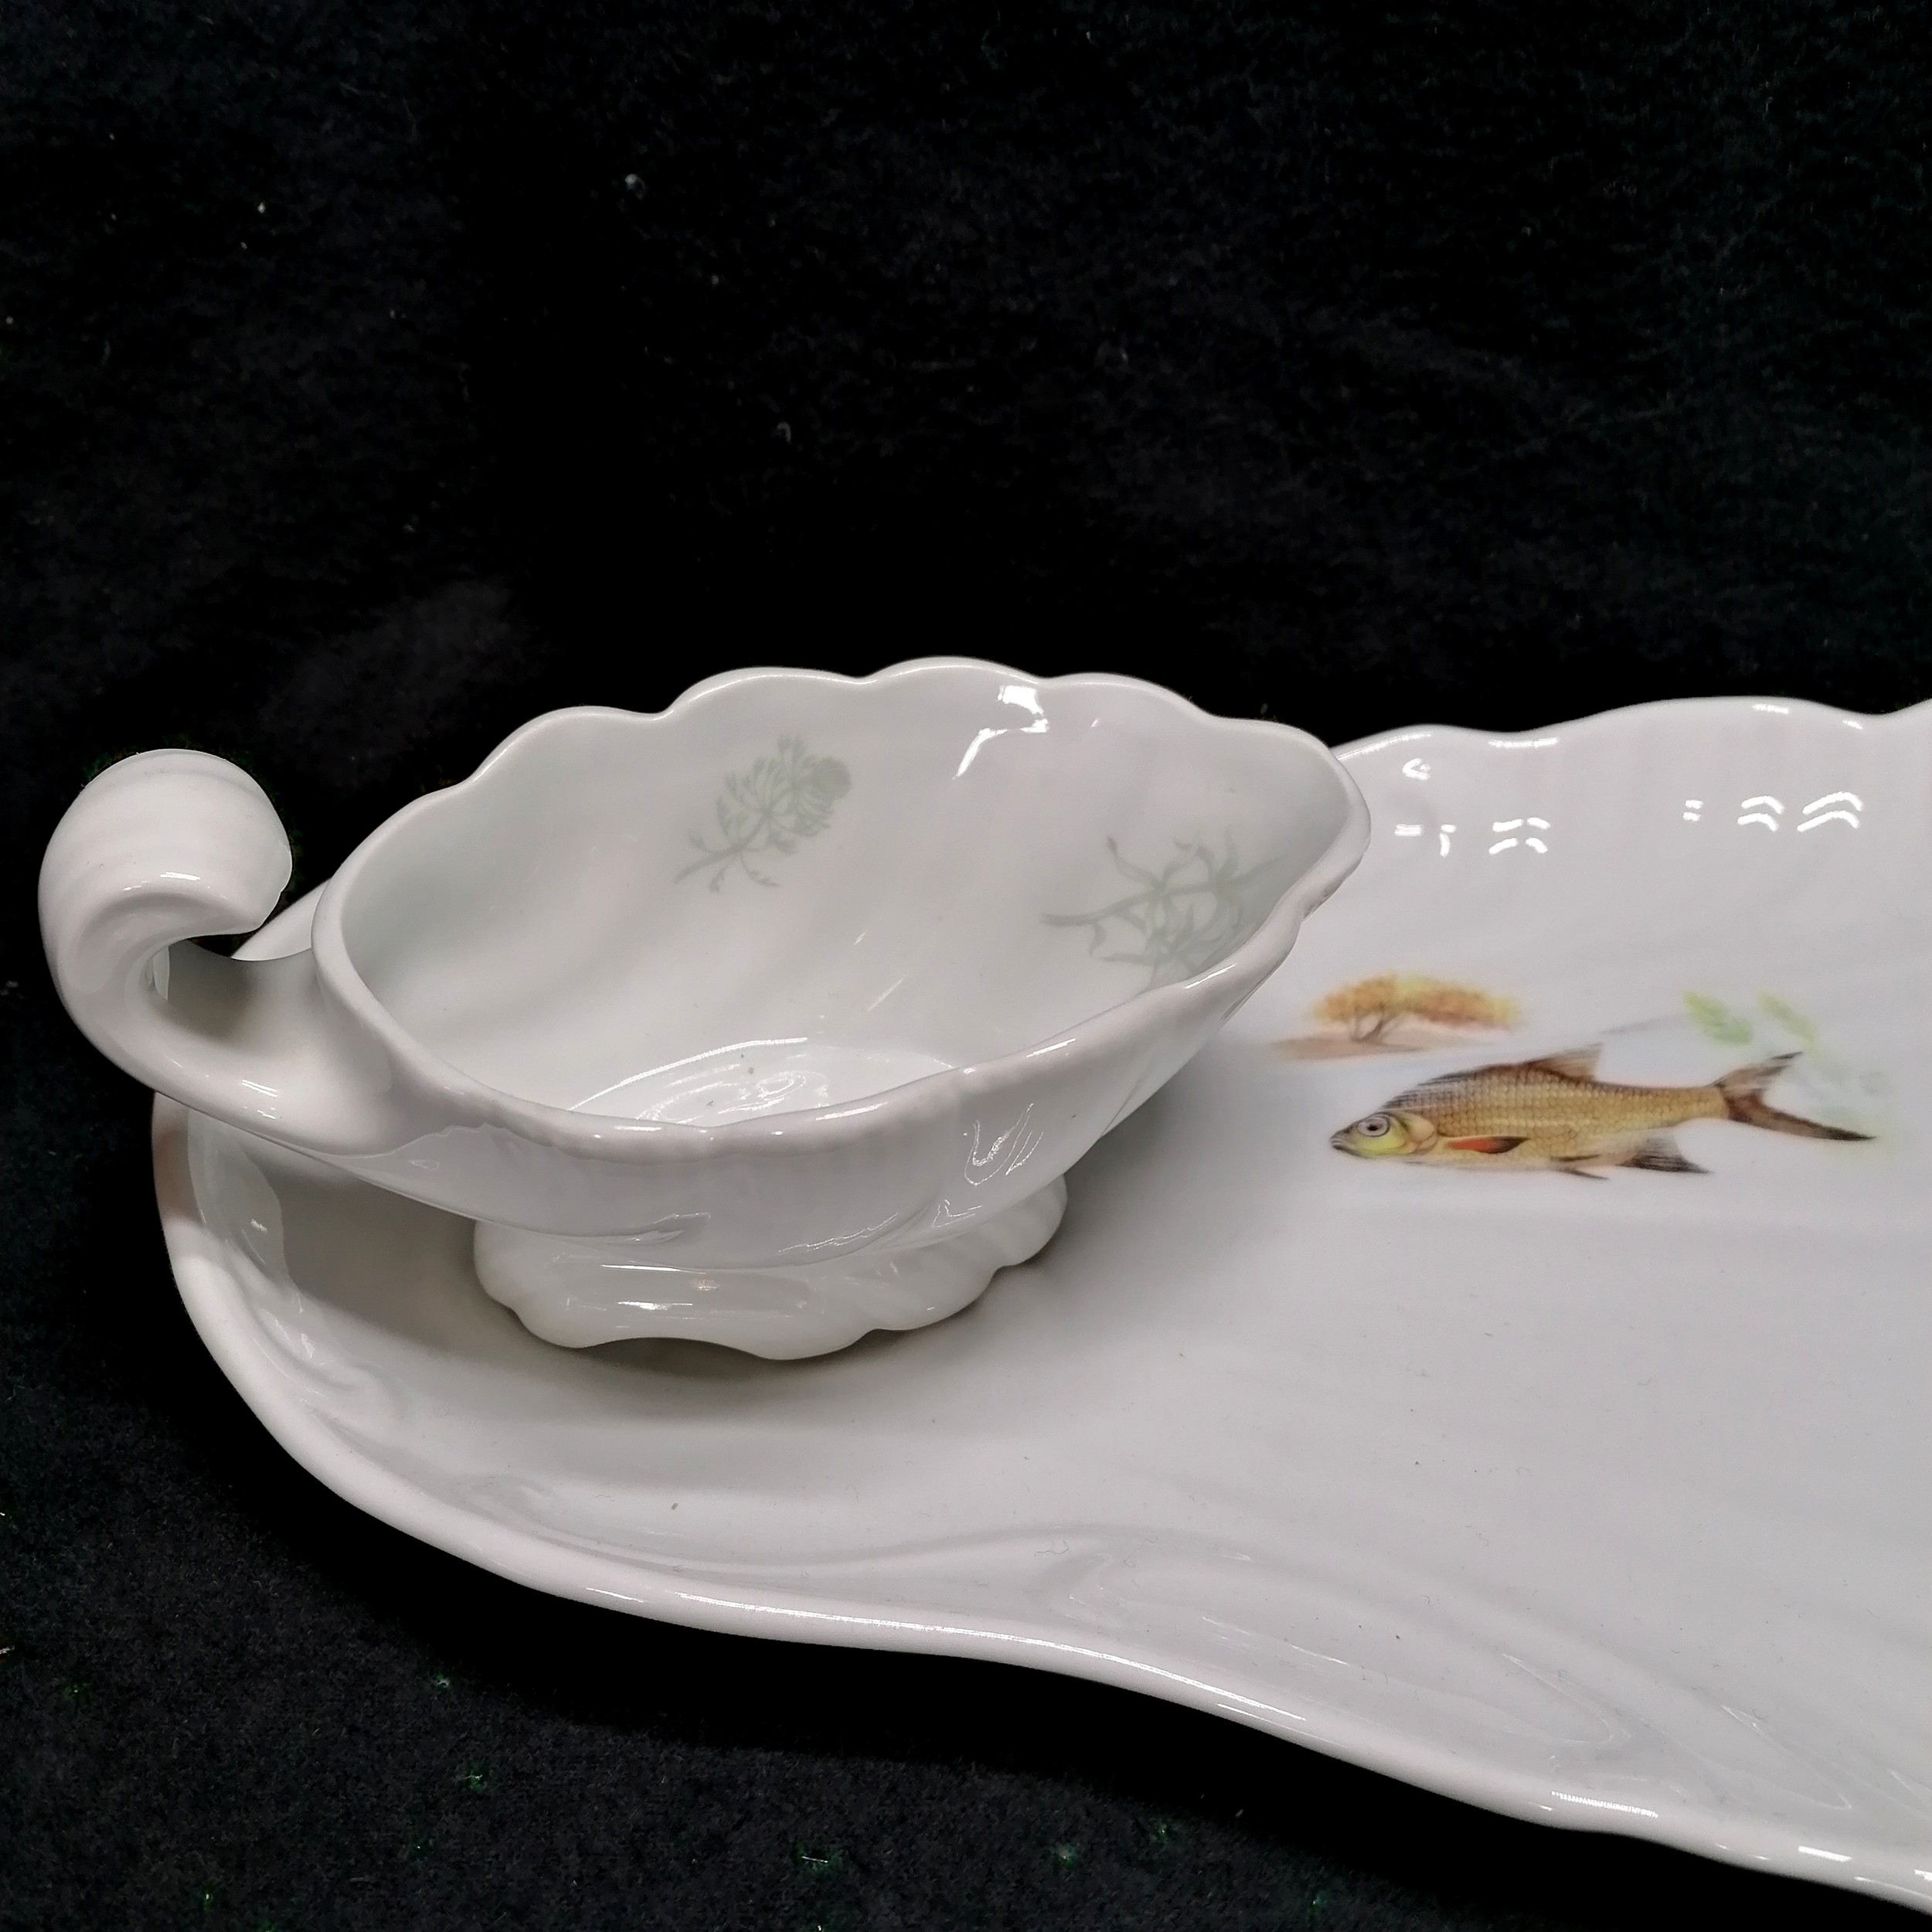 Continental salmon serving platter (56cm x 24cm) t/w 6 shell shaped matching plates & a sauceboat - Image 2 of 3